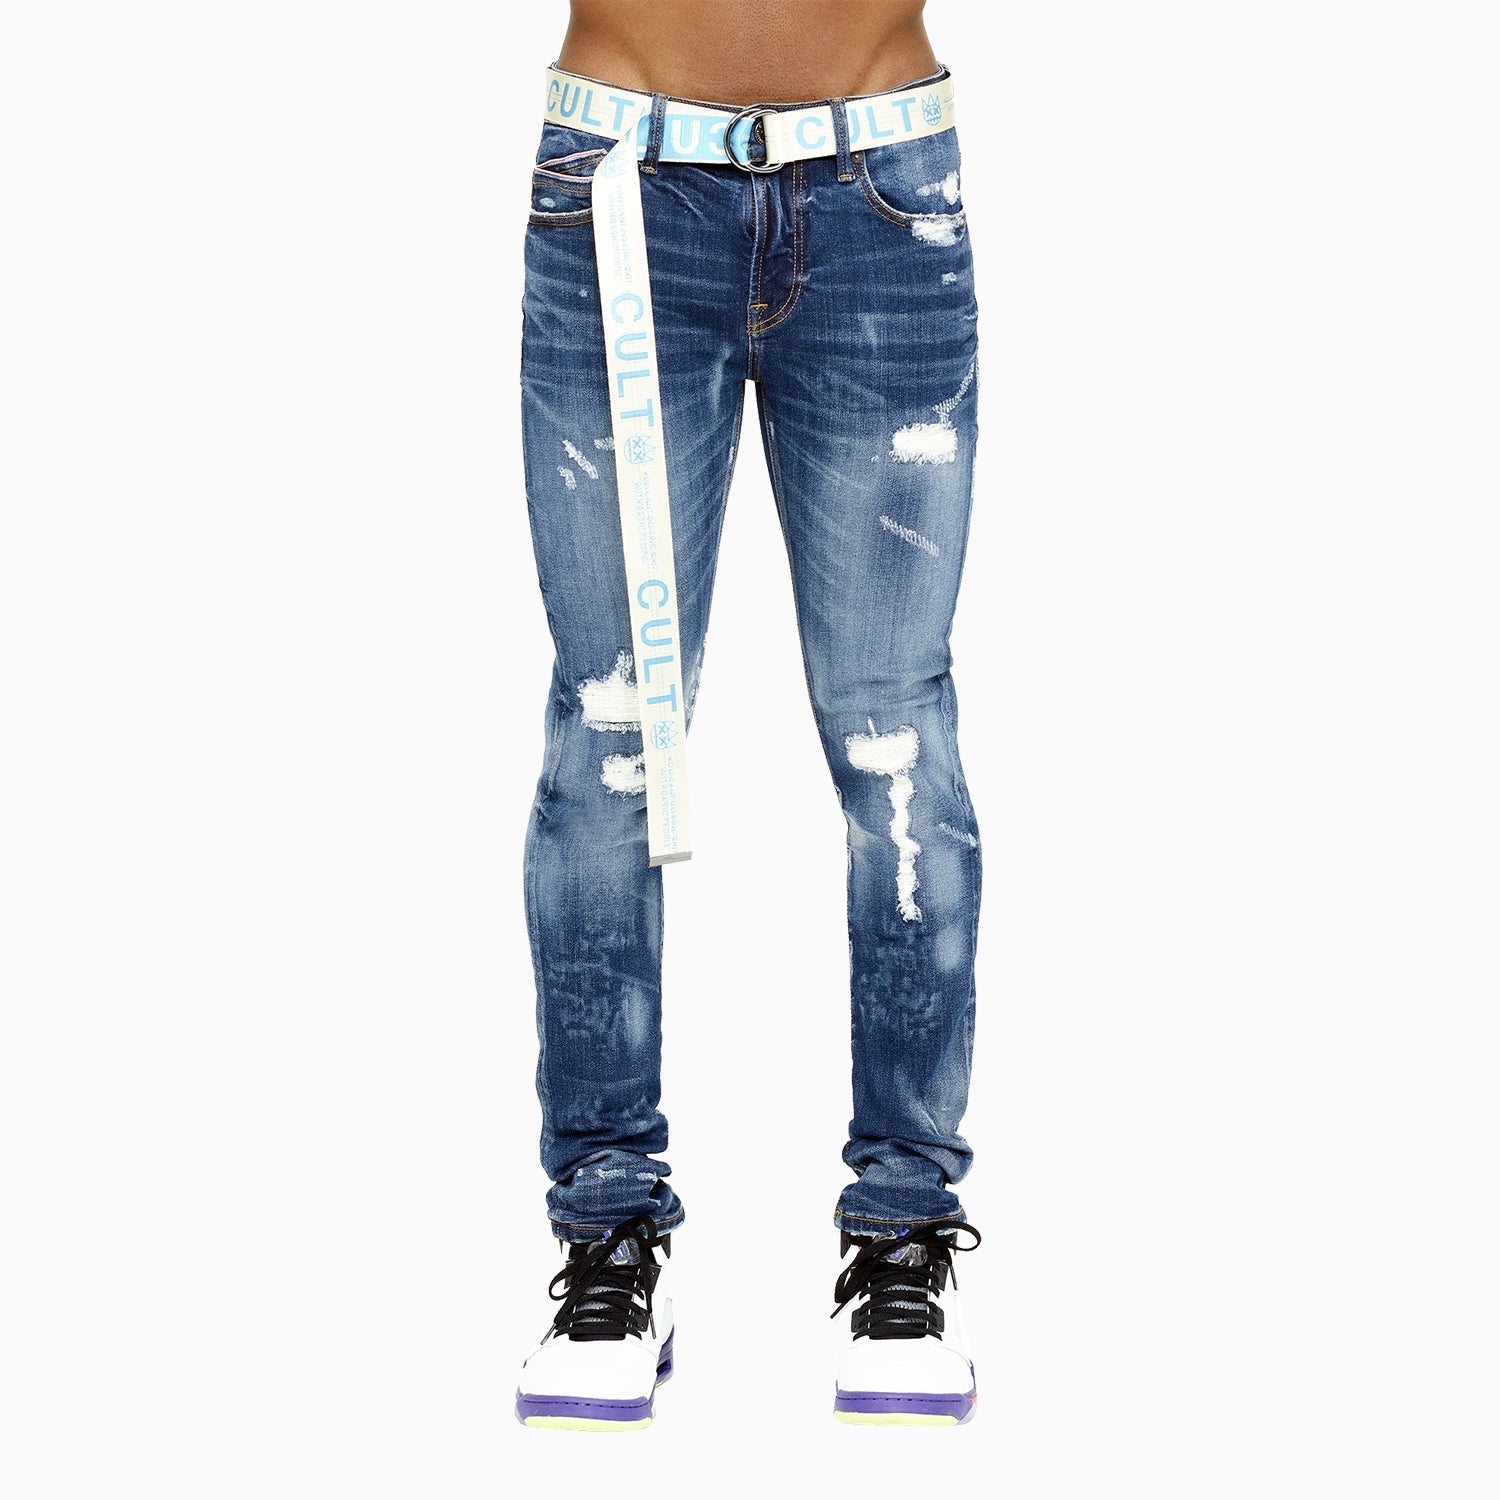 cult-of-individuality-mens-punk-super-skinny-belted-jeans-621b10-ss04p